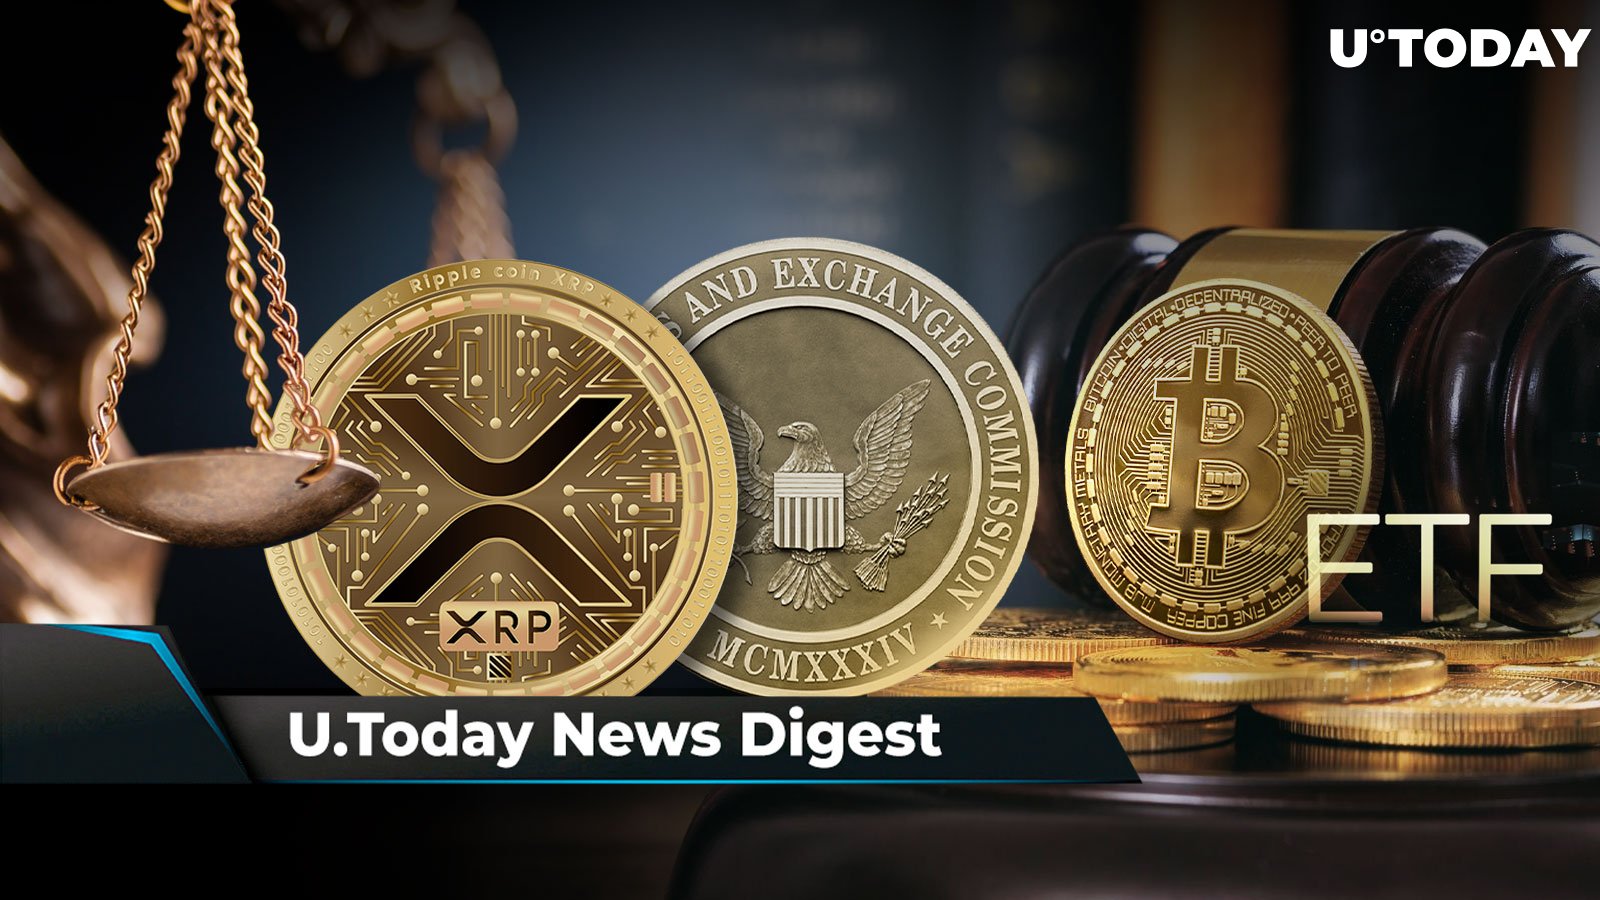 SEC Denial of Bitcoin ETF Might Result in One of Biggest Rugpulls, Ripple Case No Longer Matters for XRP Holders, Justin Sun Withdraws 500 Billion SHIB from Binance: Crypto News Digest by U.Today